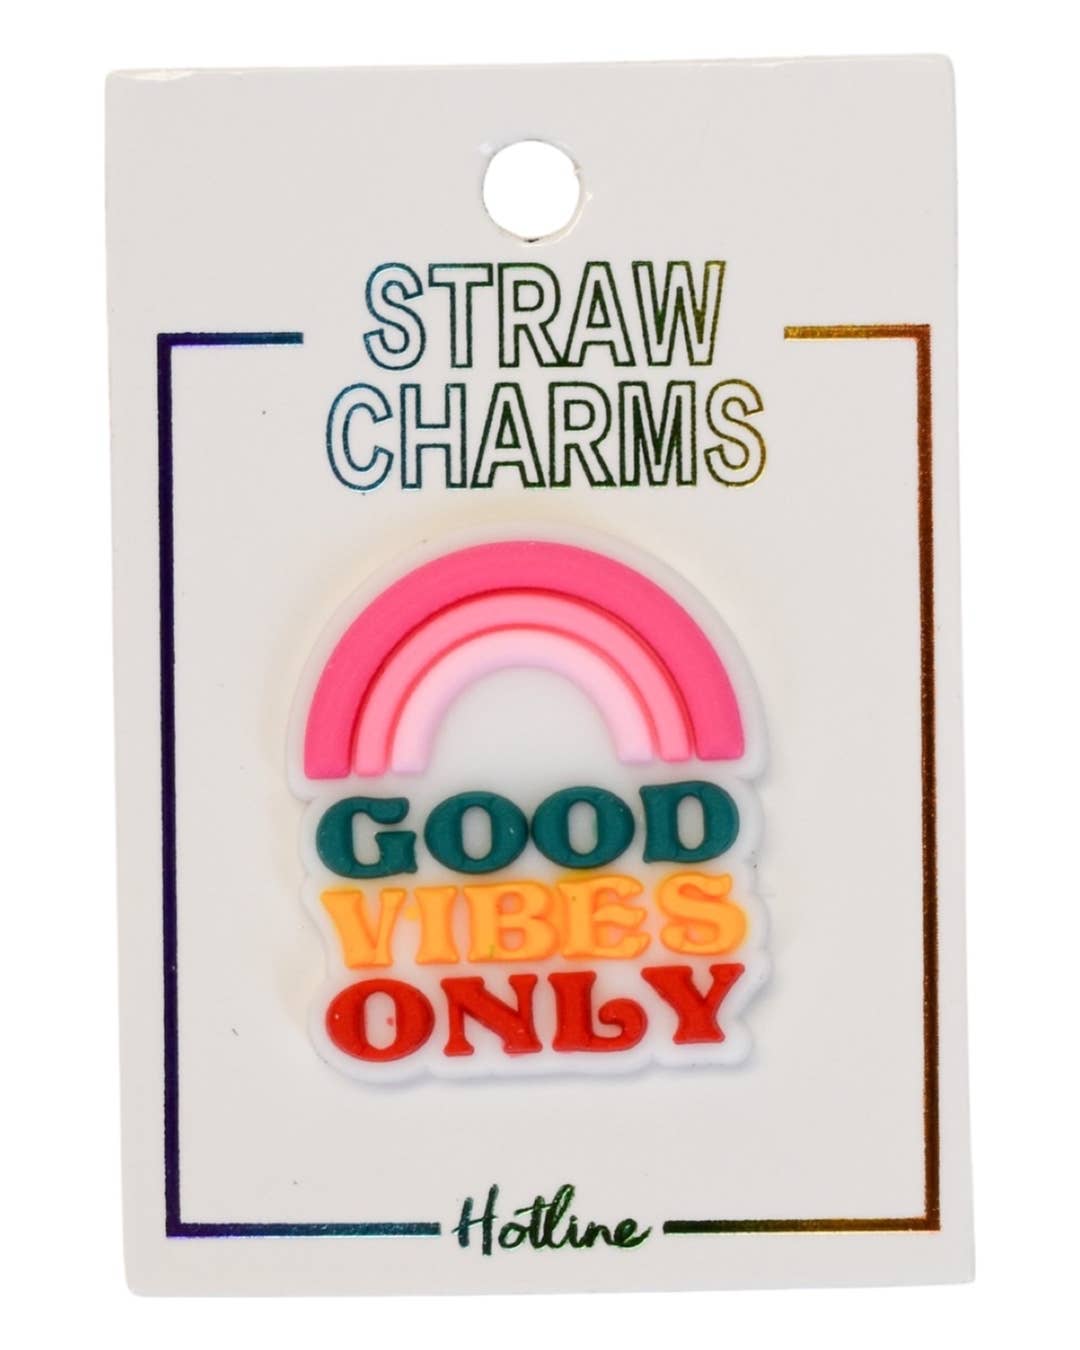 Straw Charms (Phrases & Sayings)